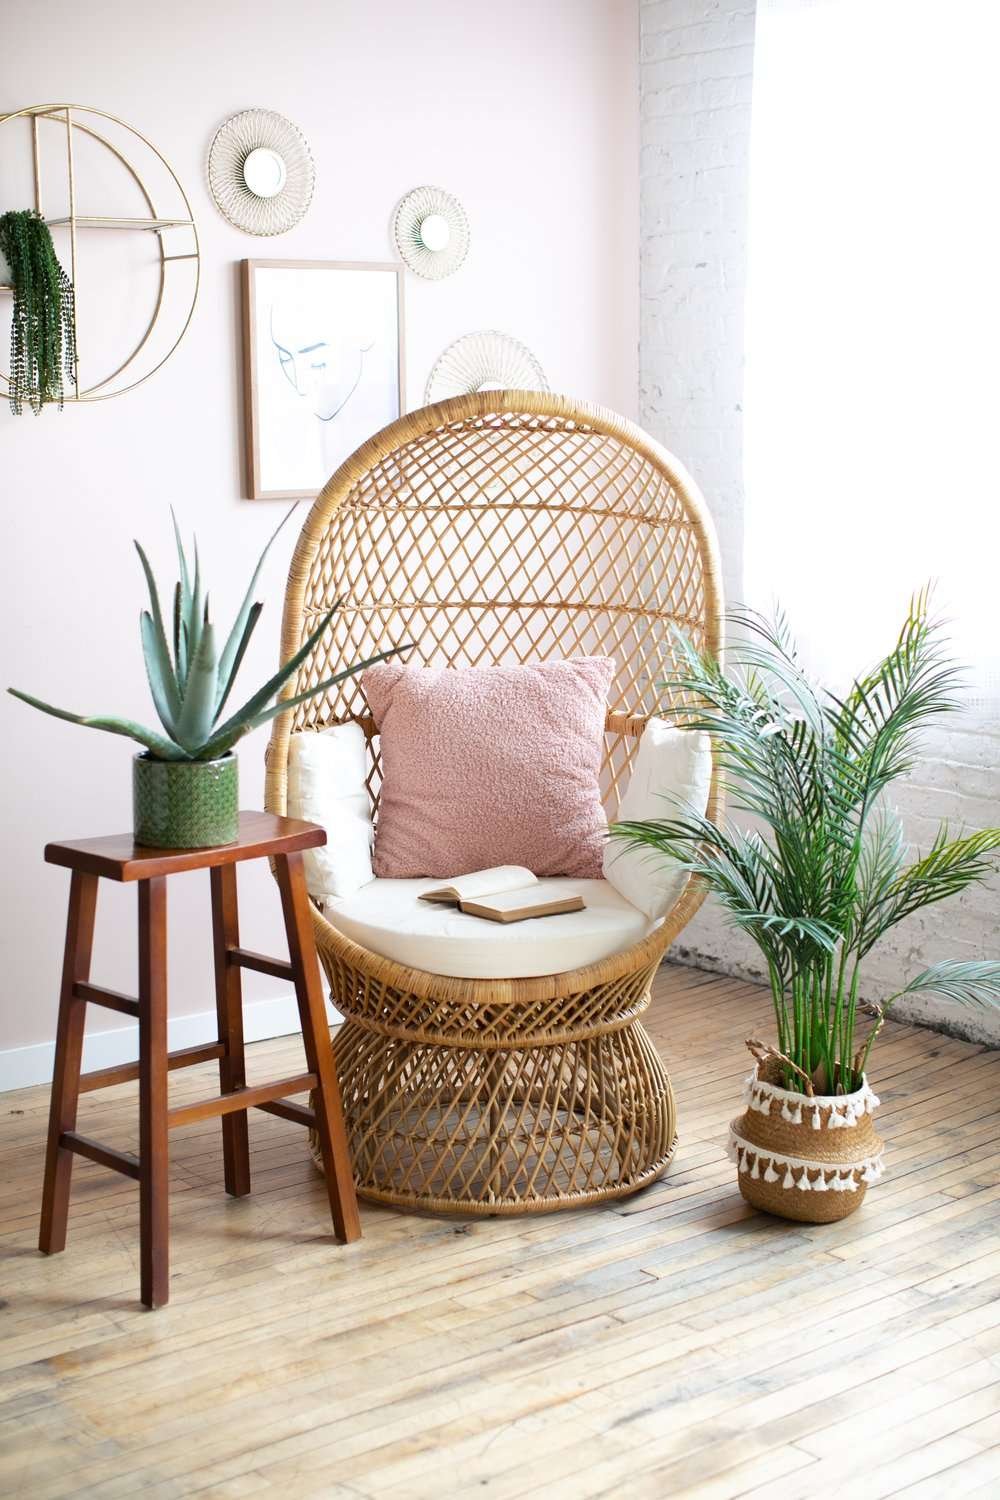 eggs chair and artificial plant props